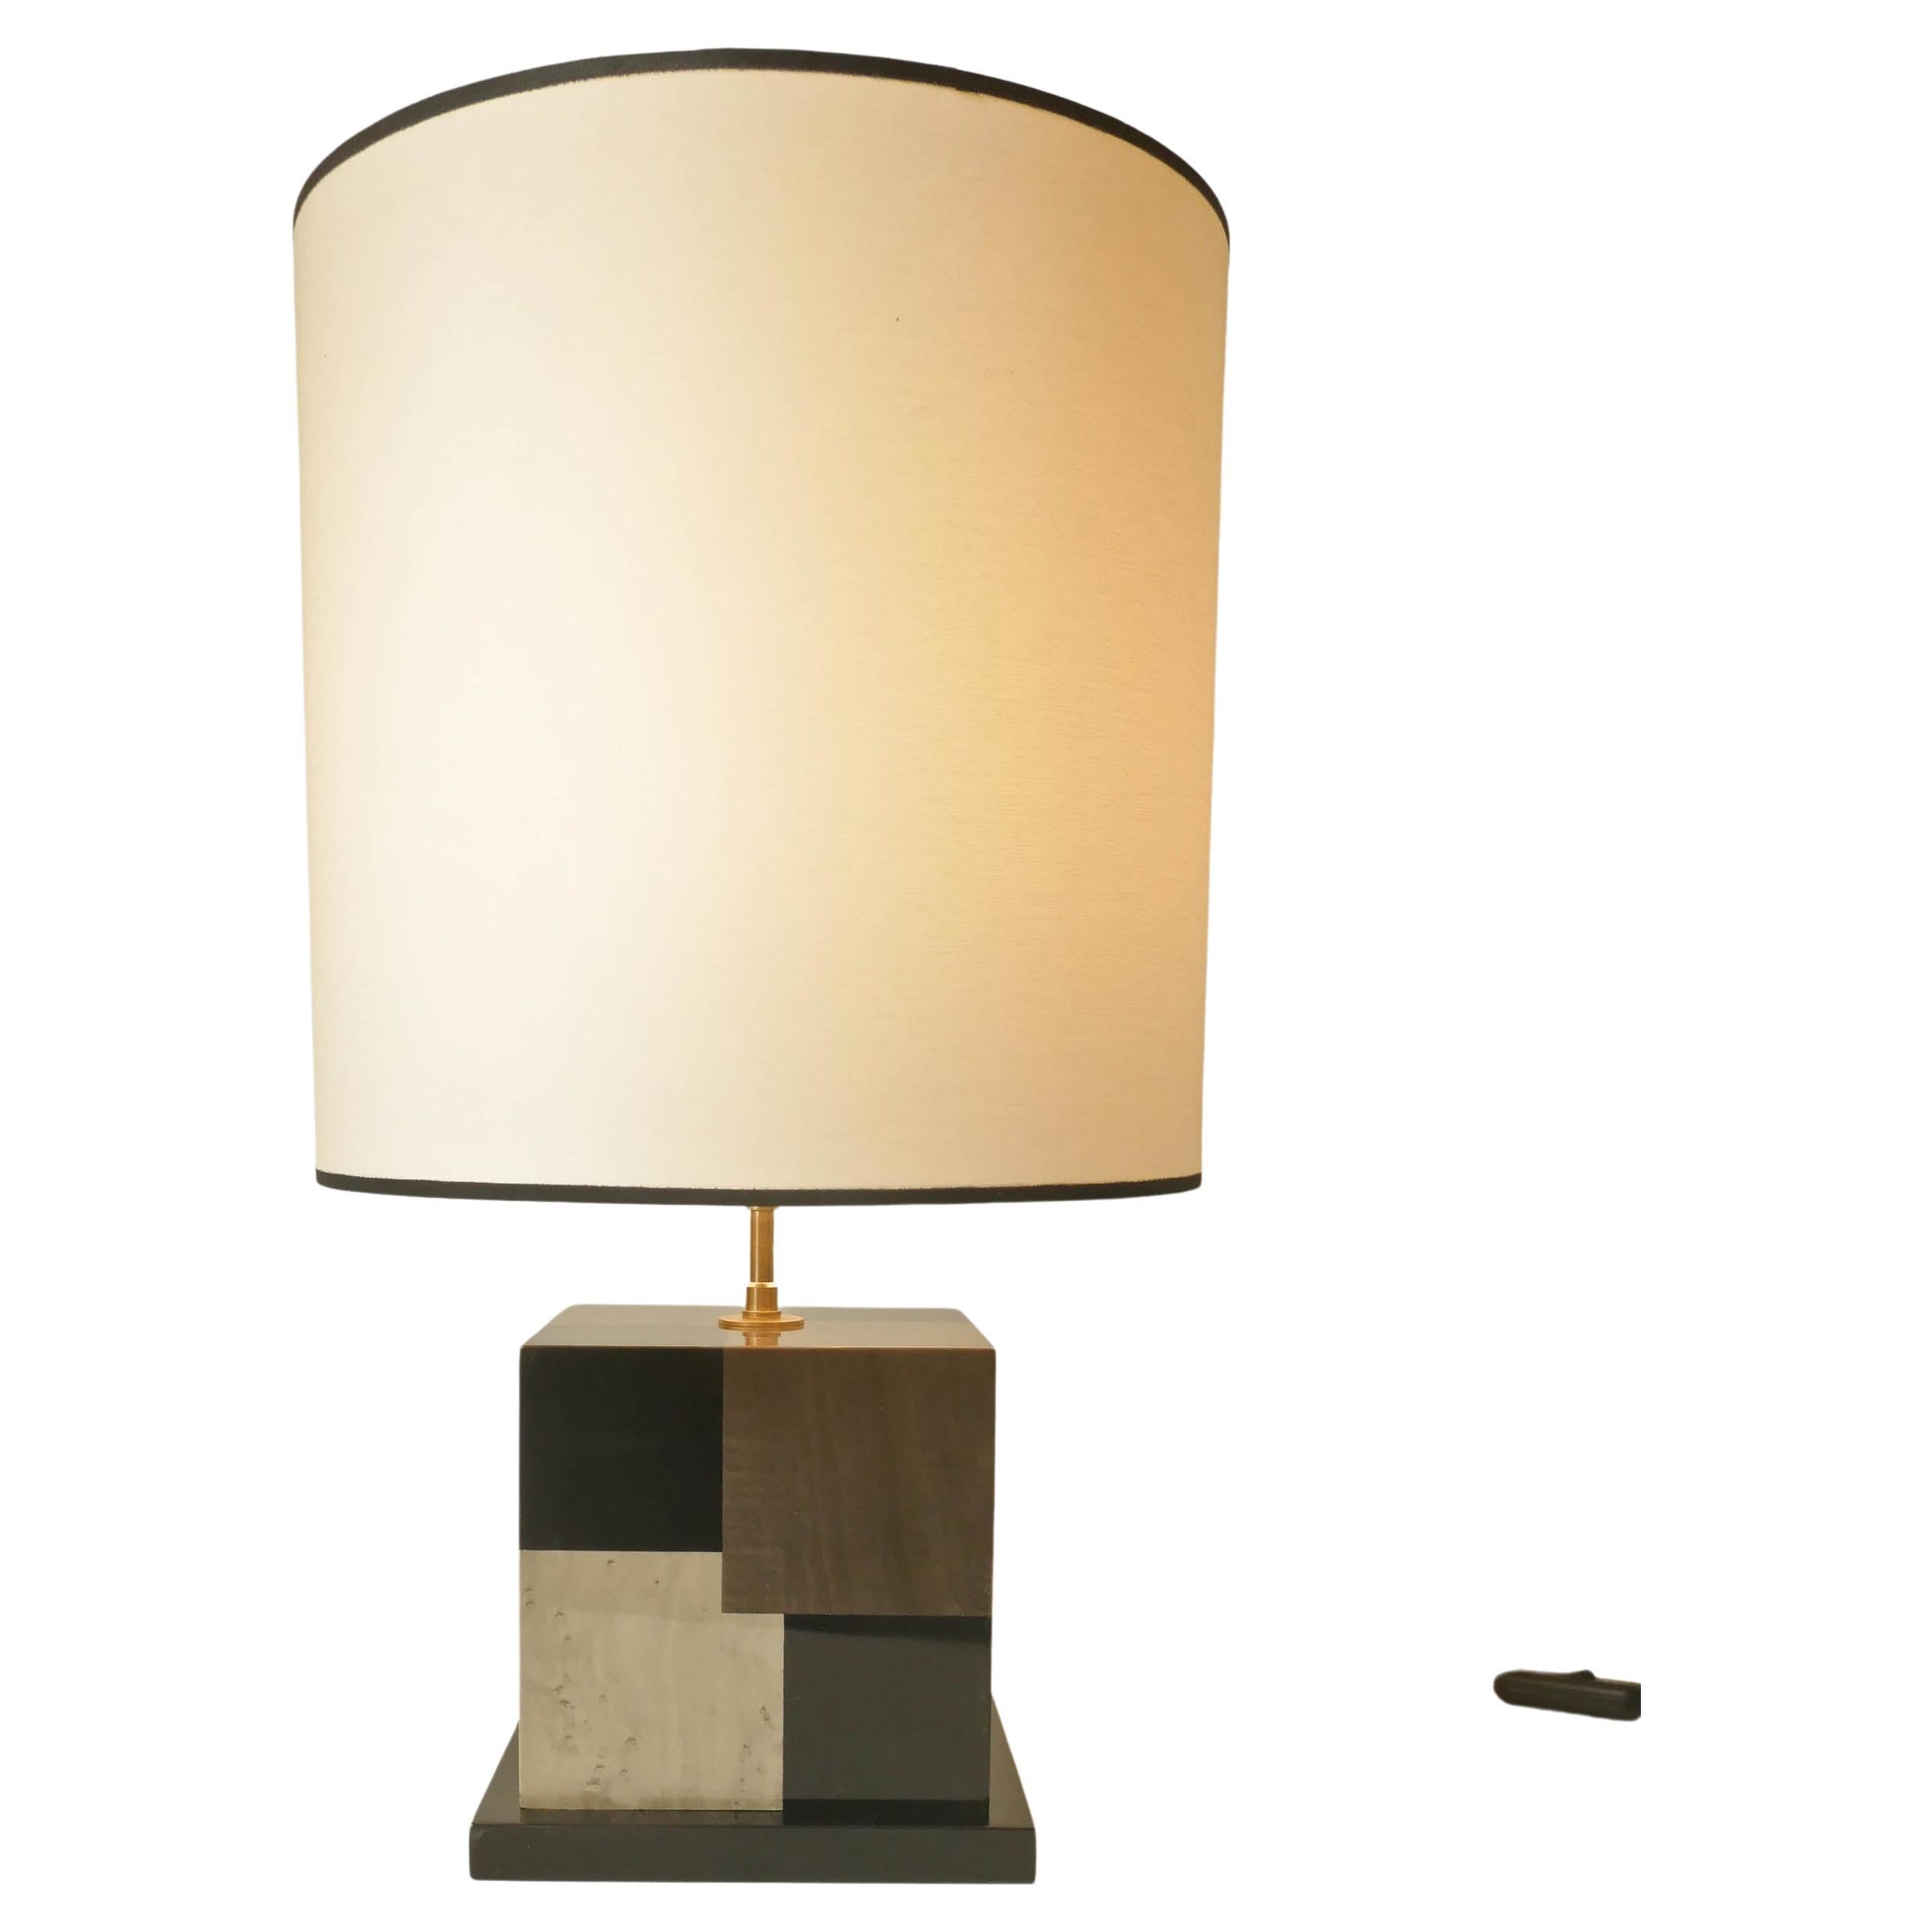 Table lamp in tinted black, light and dark Grey sycamore marquetry.
Carefully build in our Parisian workshop this lamp has a kinetic effect using the different colors to create an impression of deepness. The lamp is varnished. The bulb is a standard